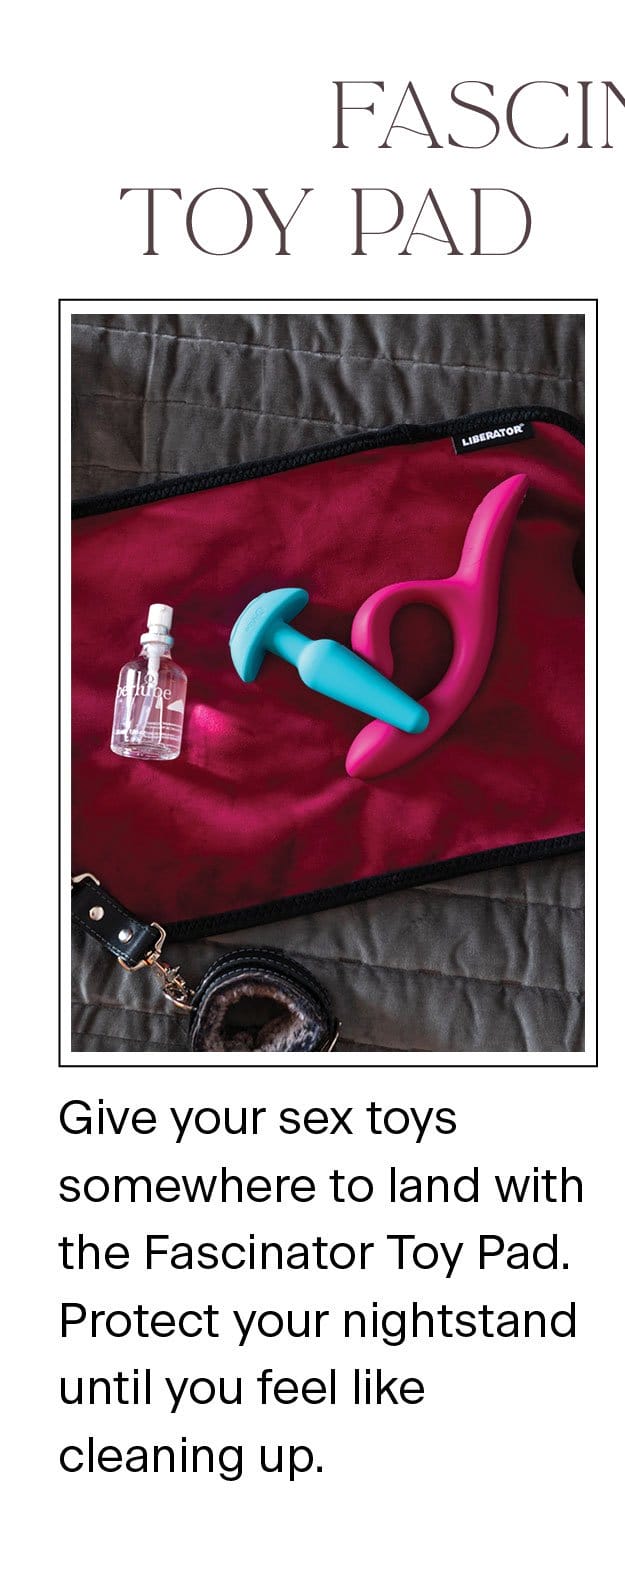 Fascinator Toy Pad | Give your sex toys somewhere to land with the Fascinator Toy Pad. Protect your nightstand until you feel like cleaning up.